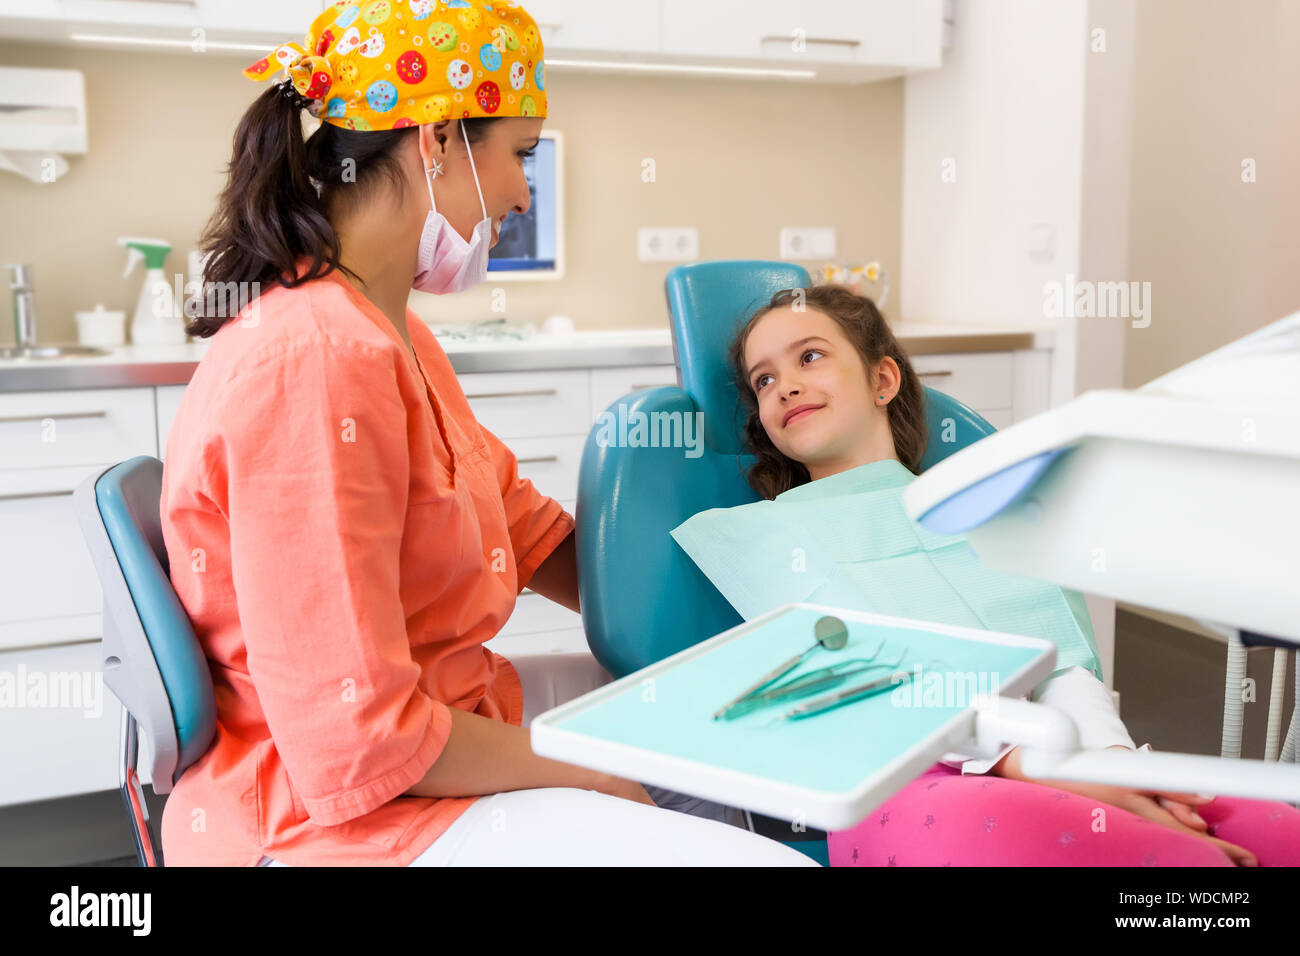 Pretty young girl a the dentist surgery for checkup with female dentist and assistant Stock Photo